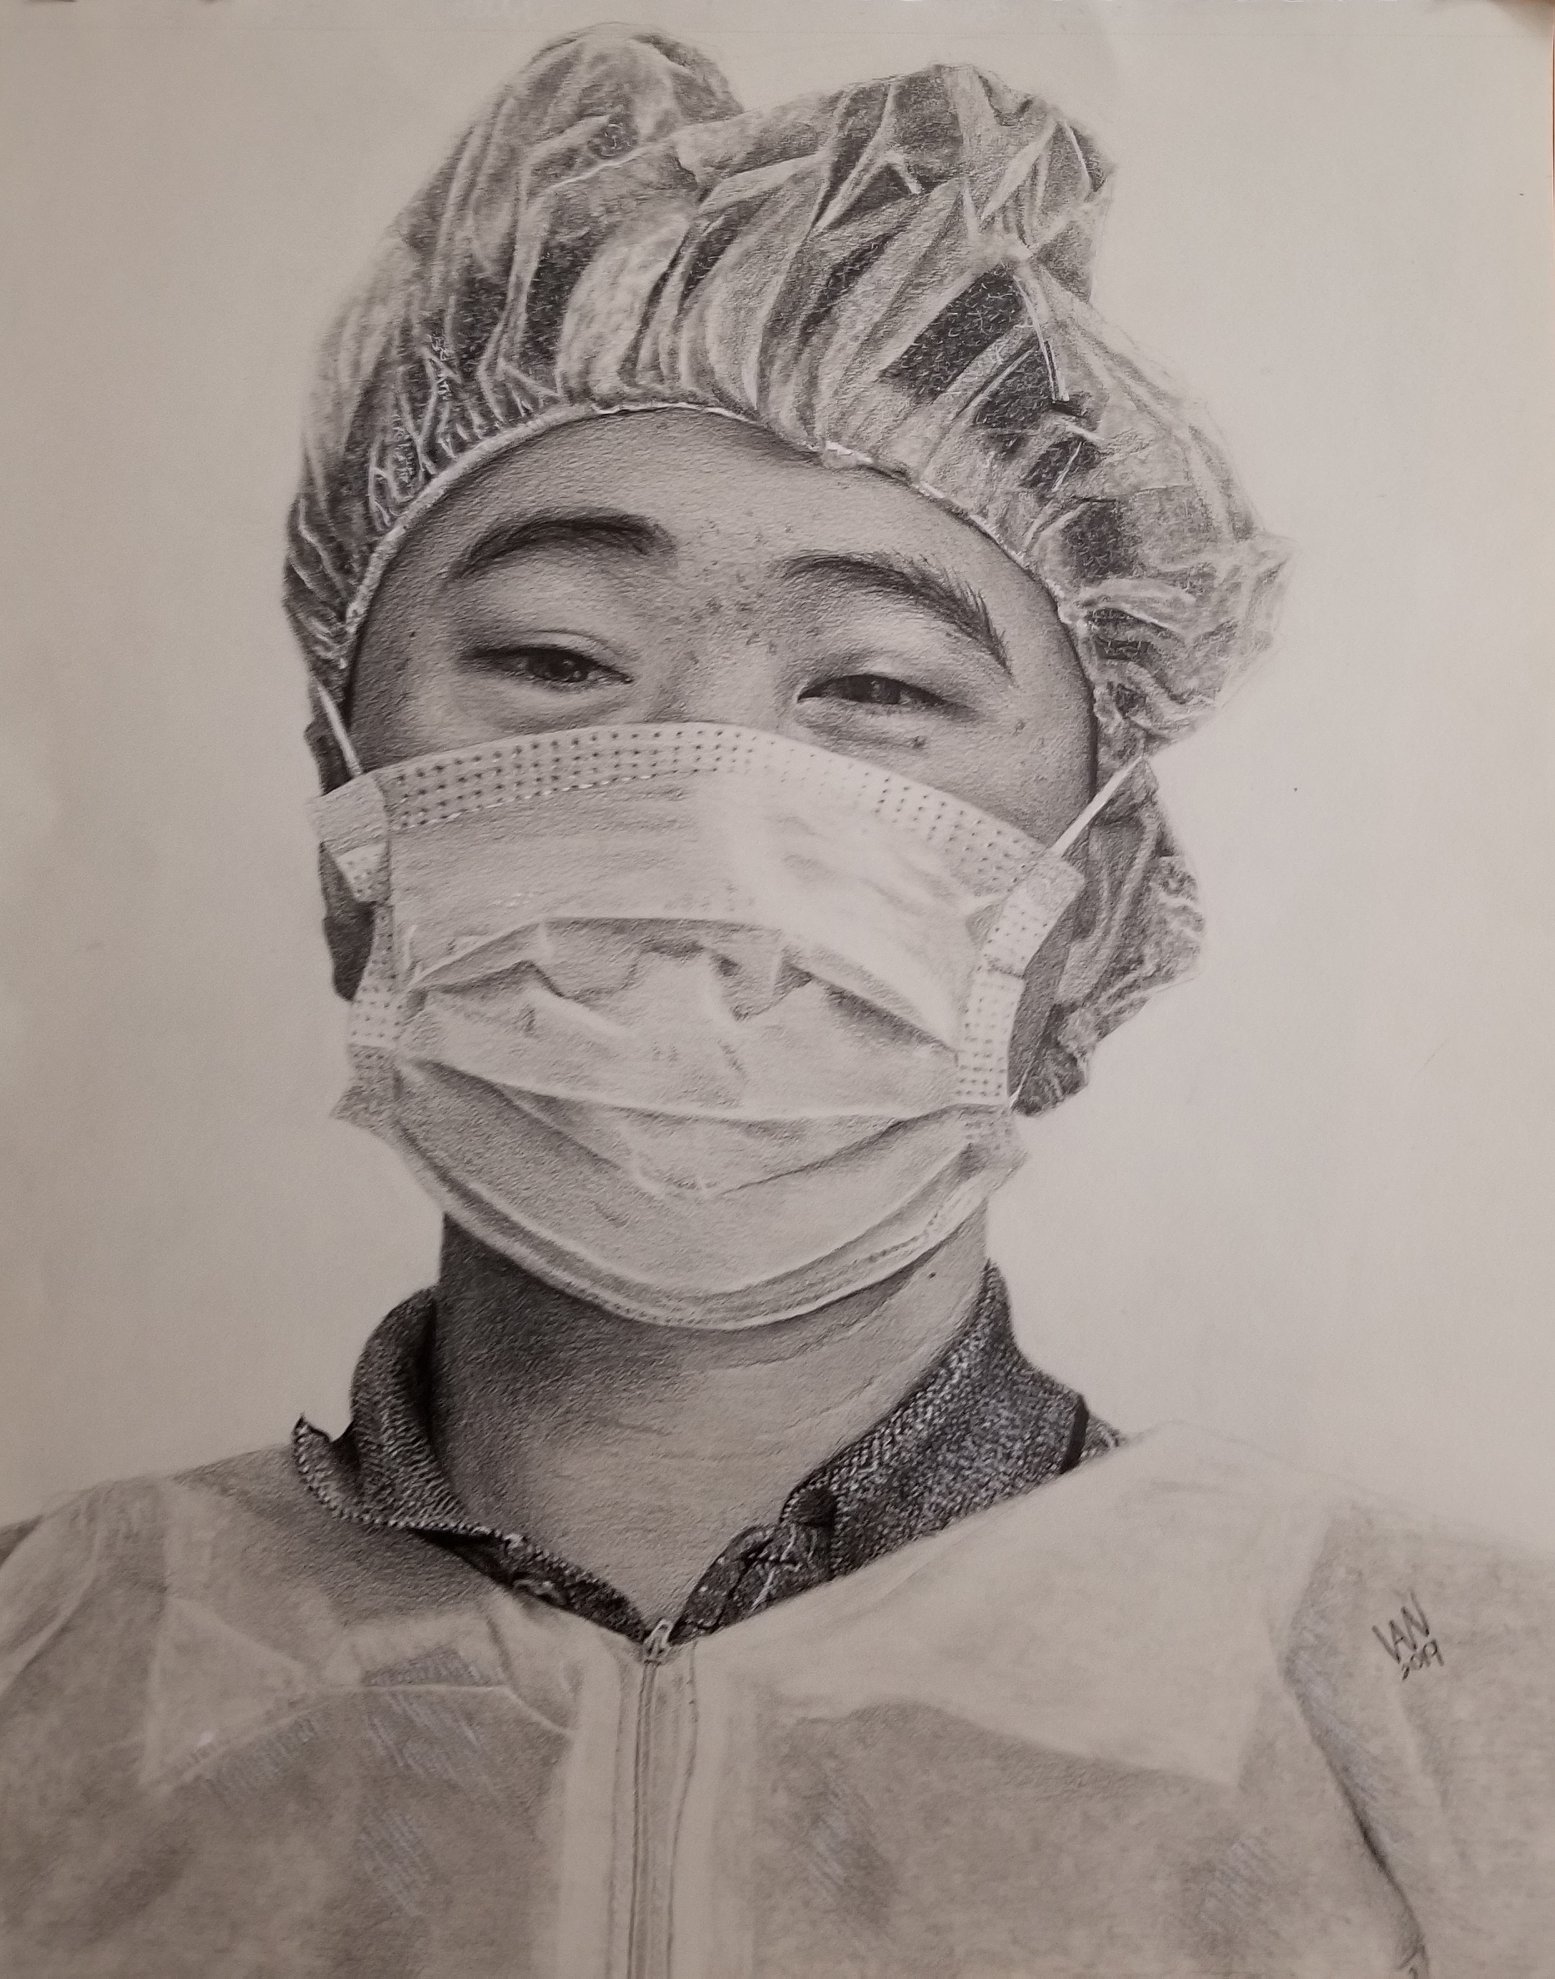 Graphite drawing of a man wearing scrubs and a face mask.